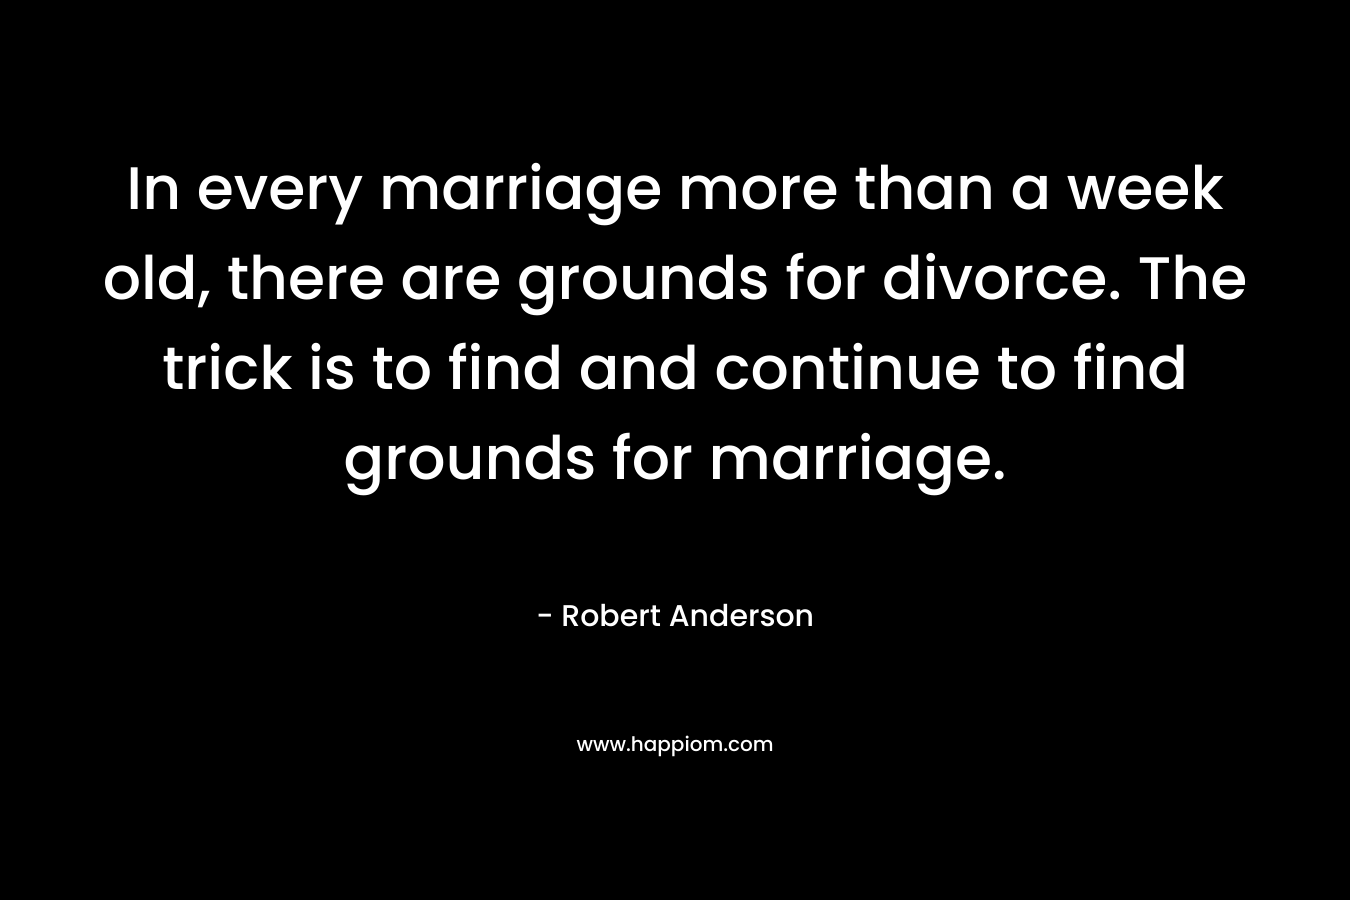 In every marriage more than a week old, there are grounds for divorce. The trick is to find and continue to find grounds for marriage.